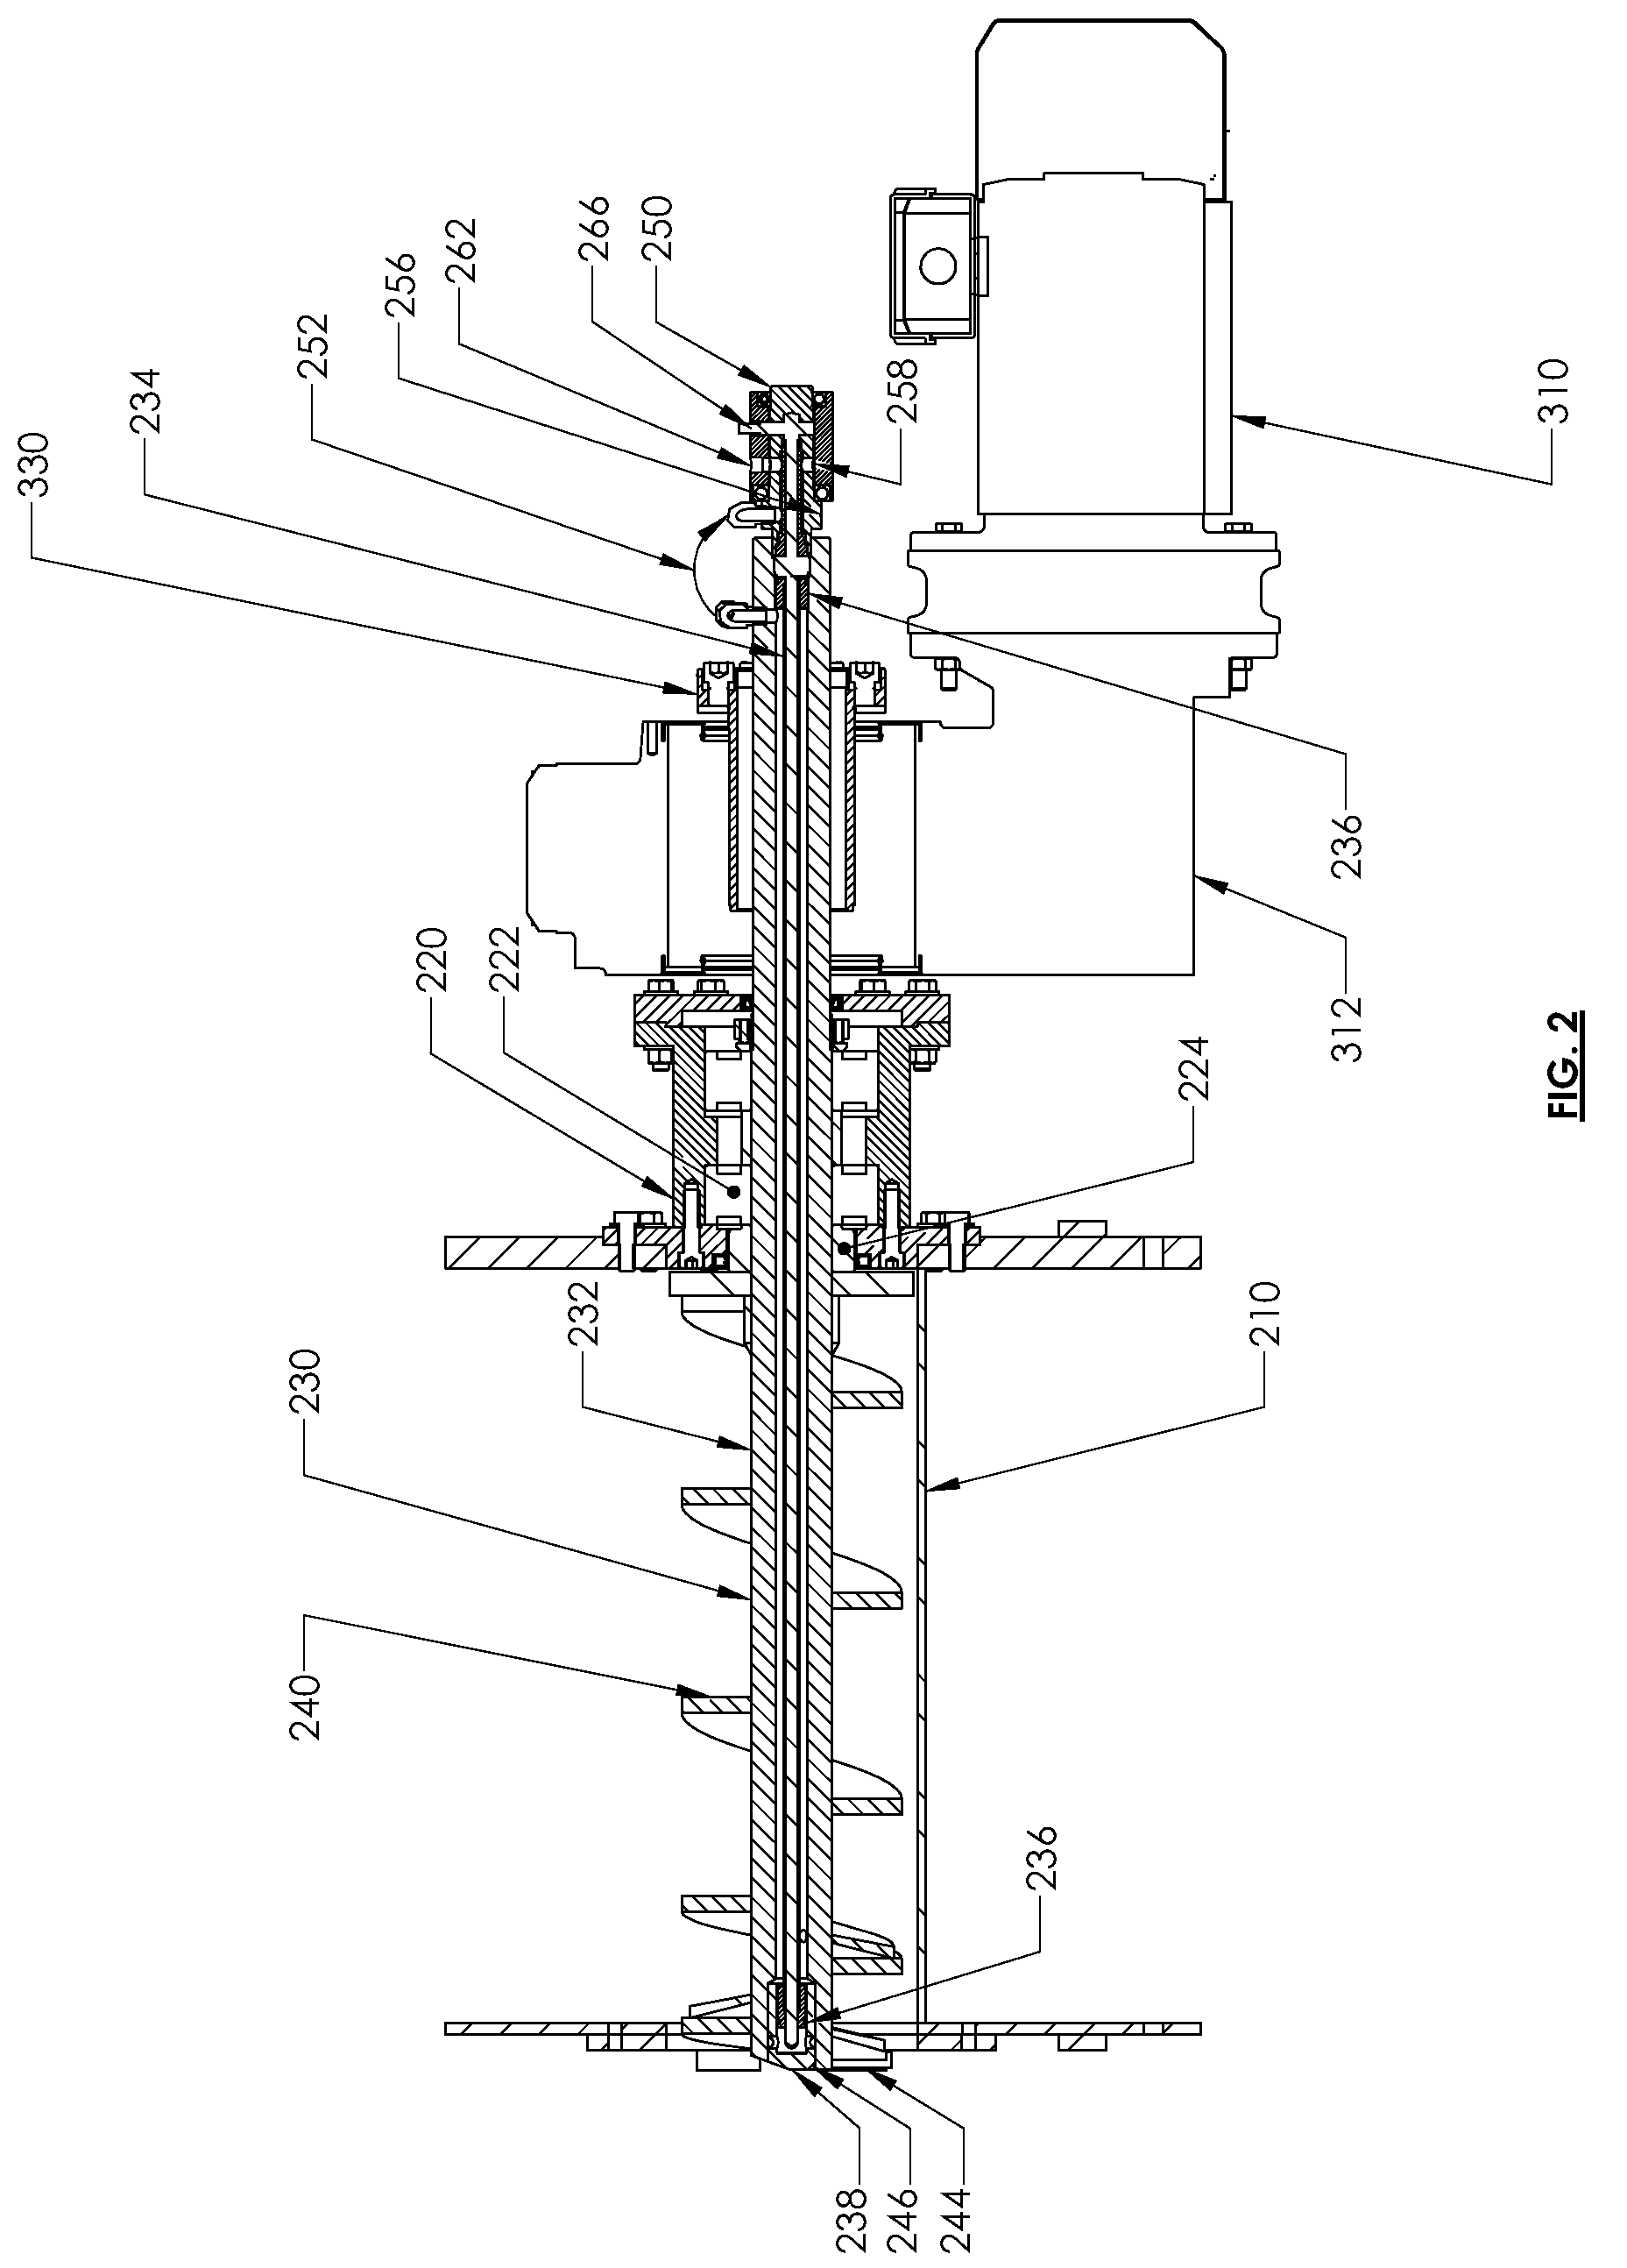 System and method for cooling a densifier